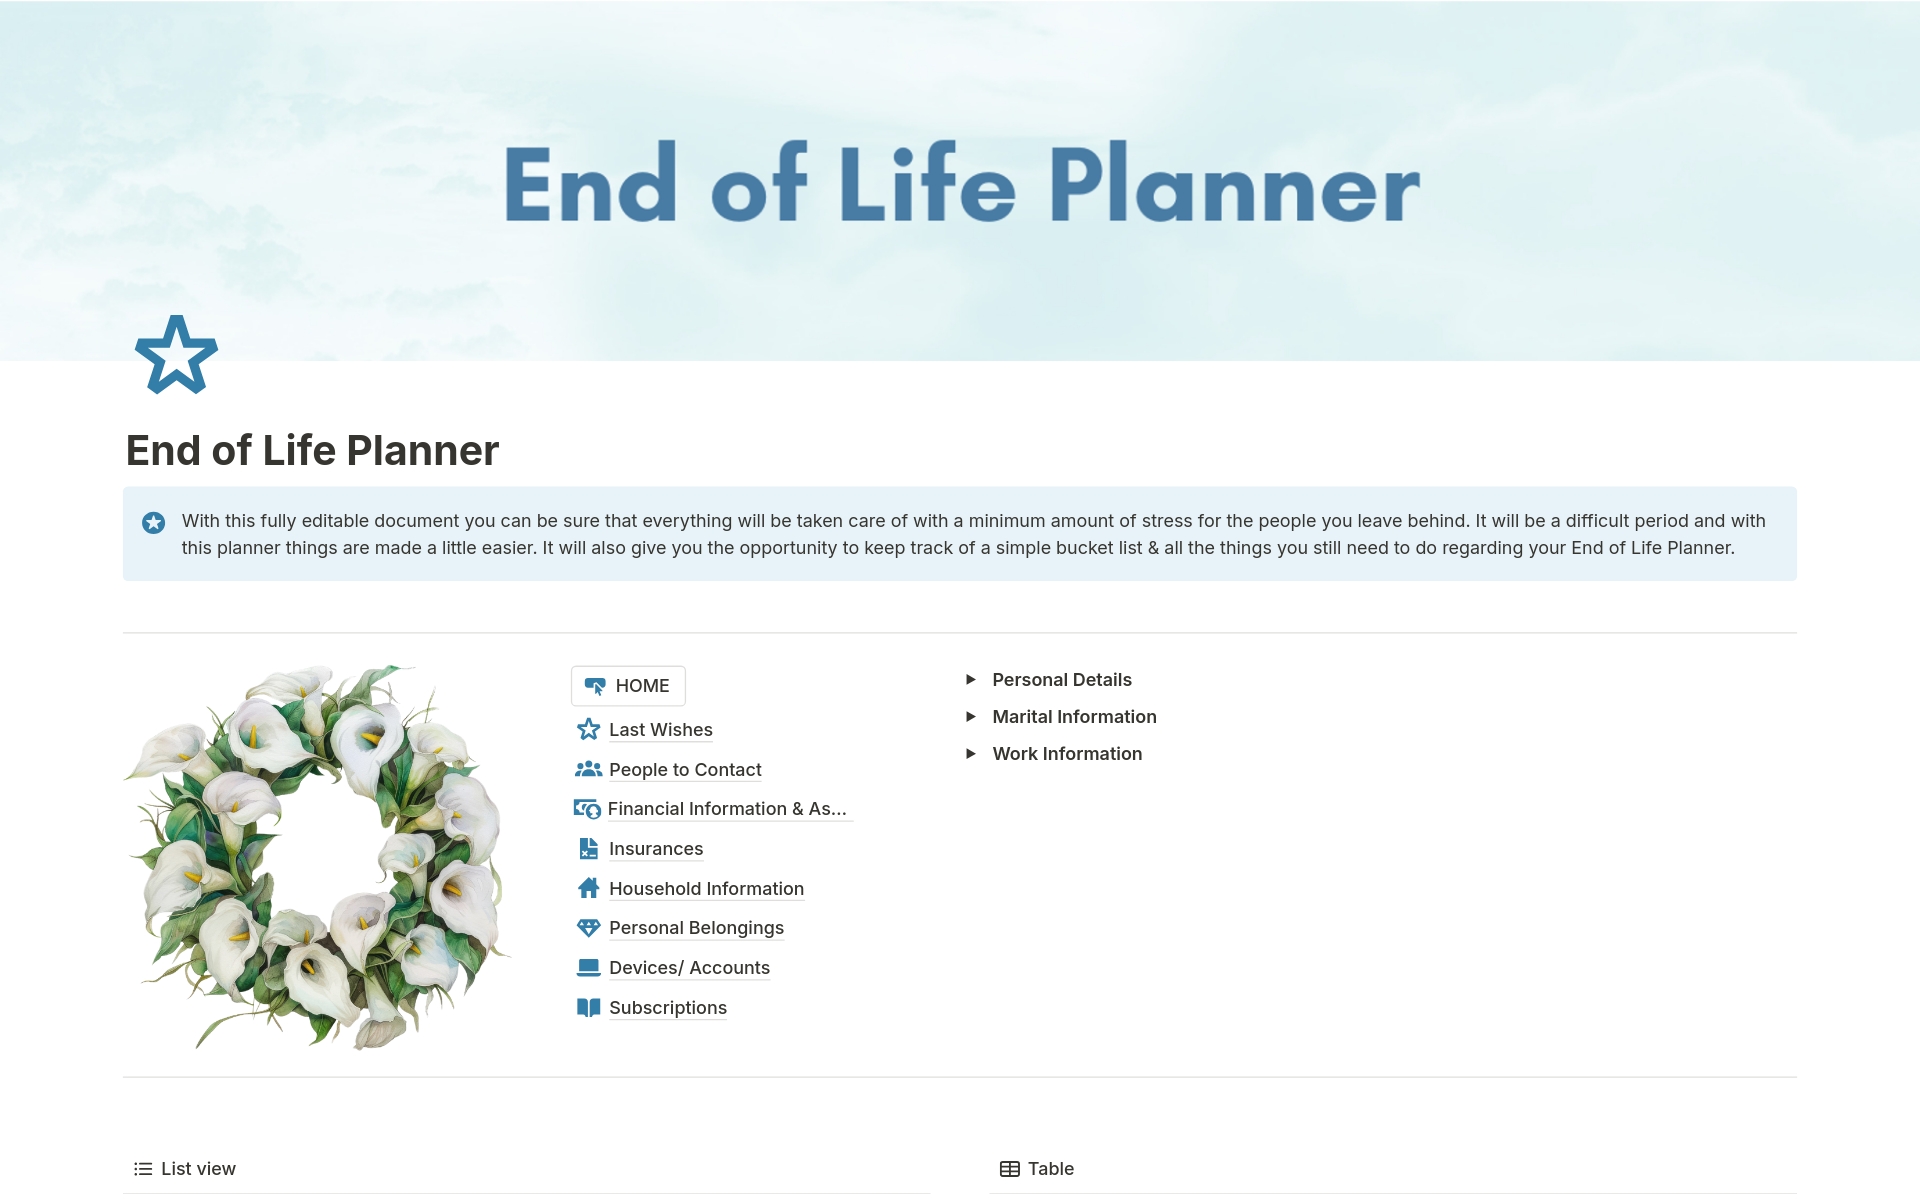 With this fully editable document you can be sure that everything will be taken care of with a minimum amount of stress for the people you leave behind. It will be a difficult period and with this planner things are made a little easier. 